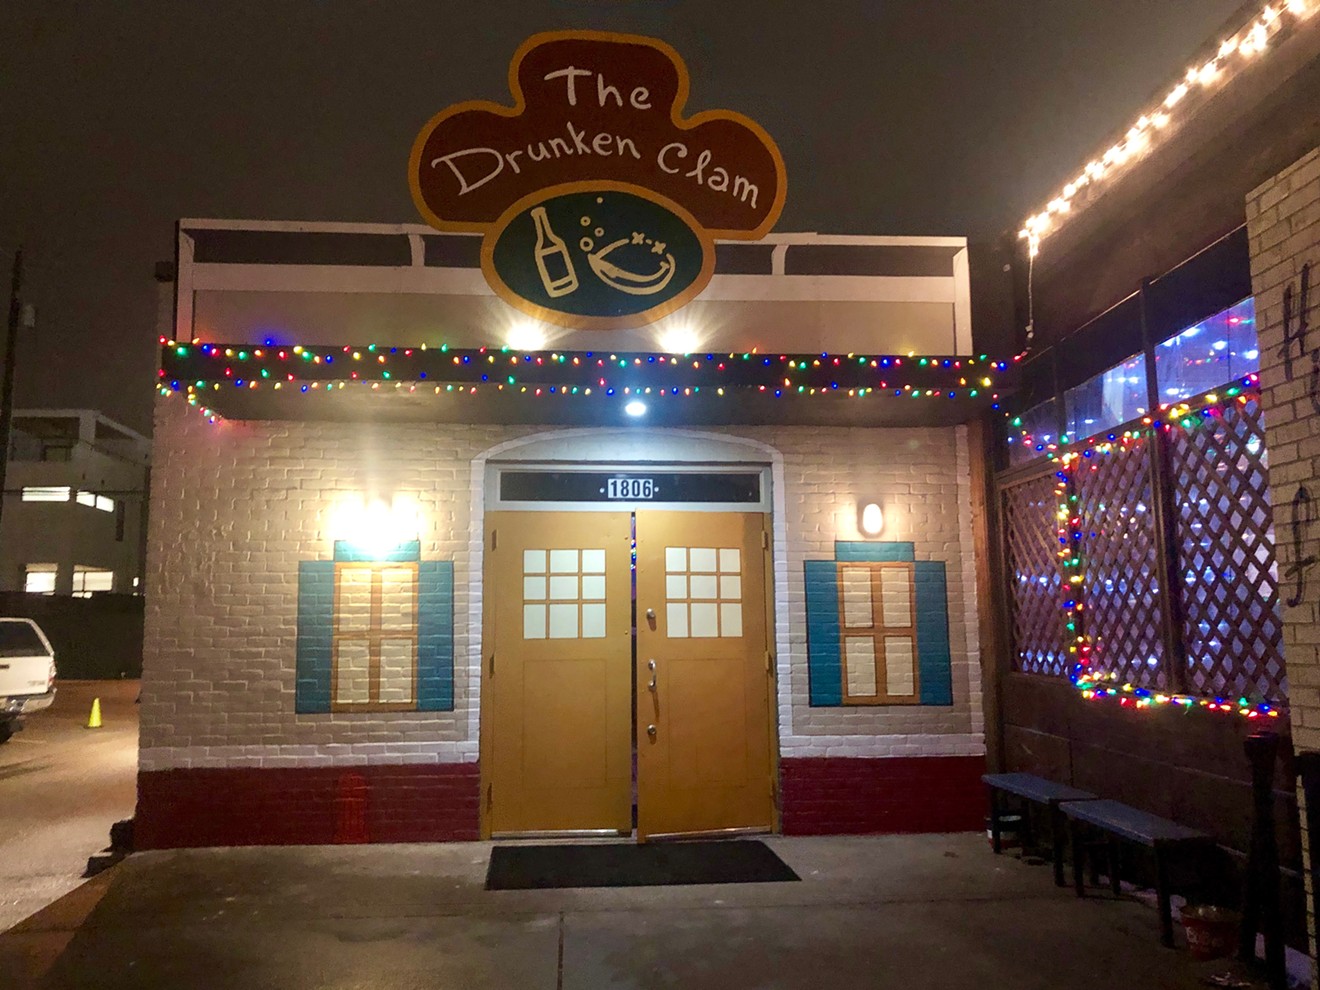 The Whippersnapper Closes to Make Way for a Family-Guy Themed Pop-Up Bar,  the Drunken Clam Dallas